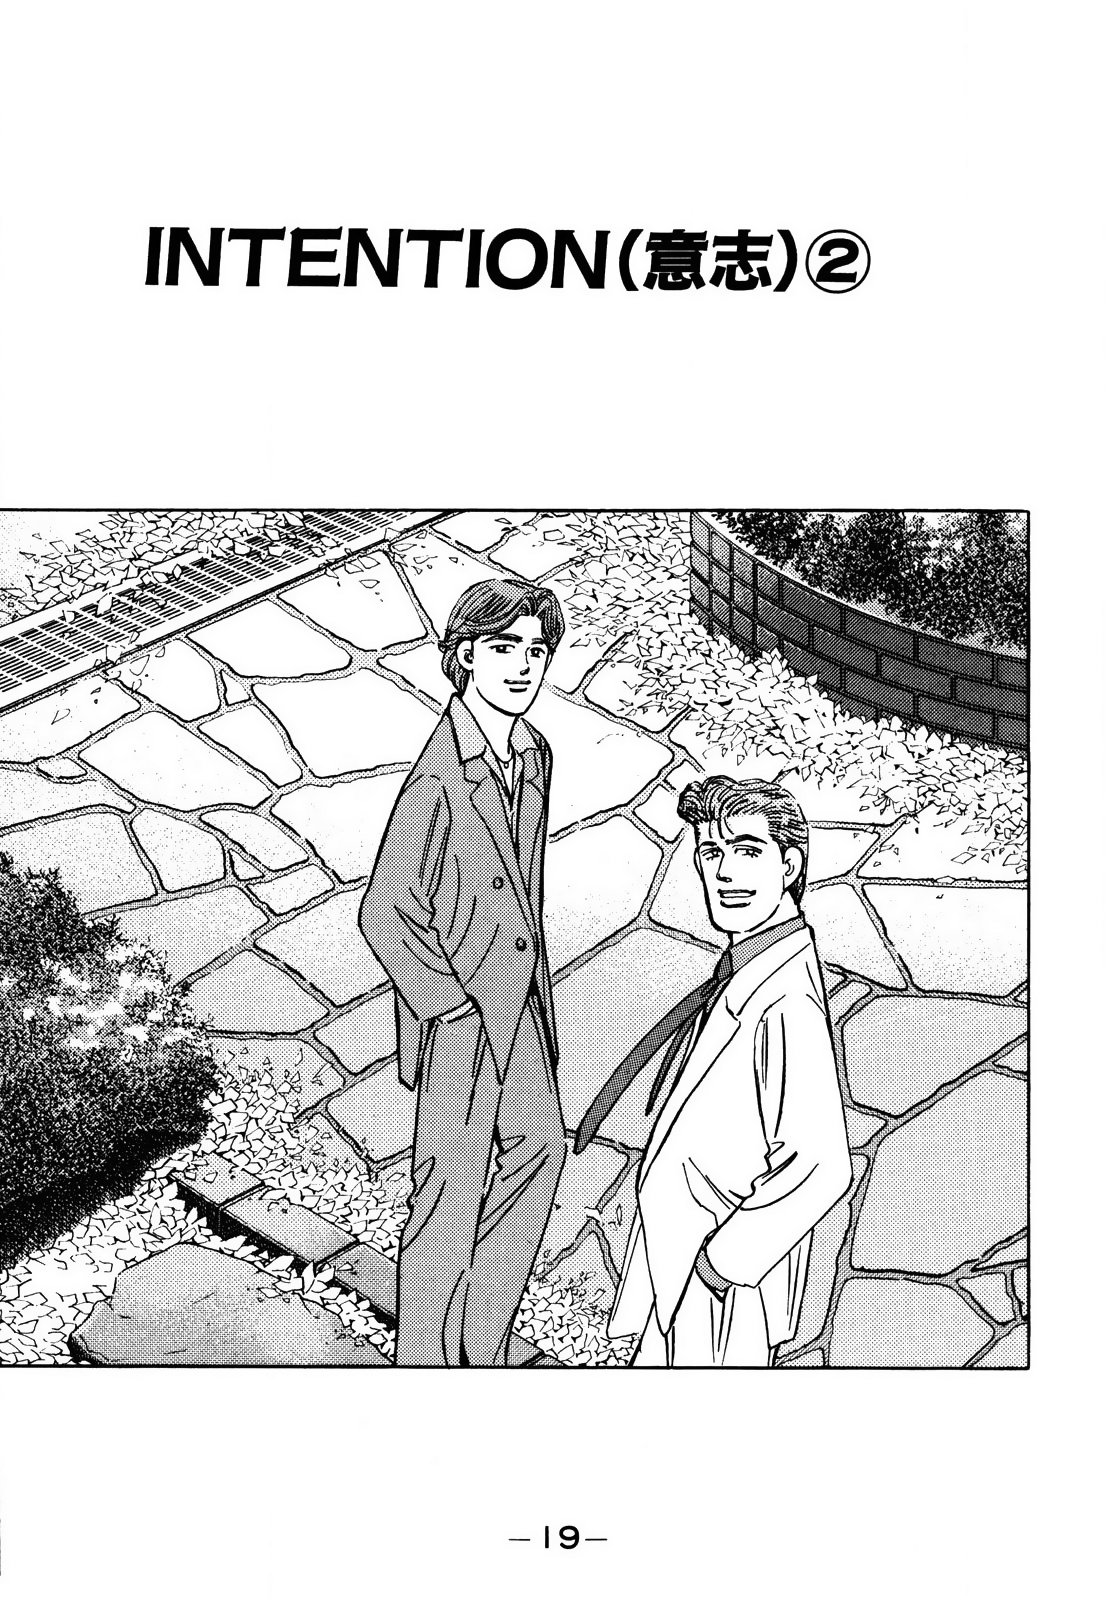 Wangan Midnight Vol.13 Chapter 148: Intention ② - Picture 1